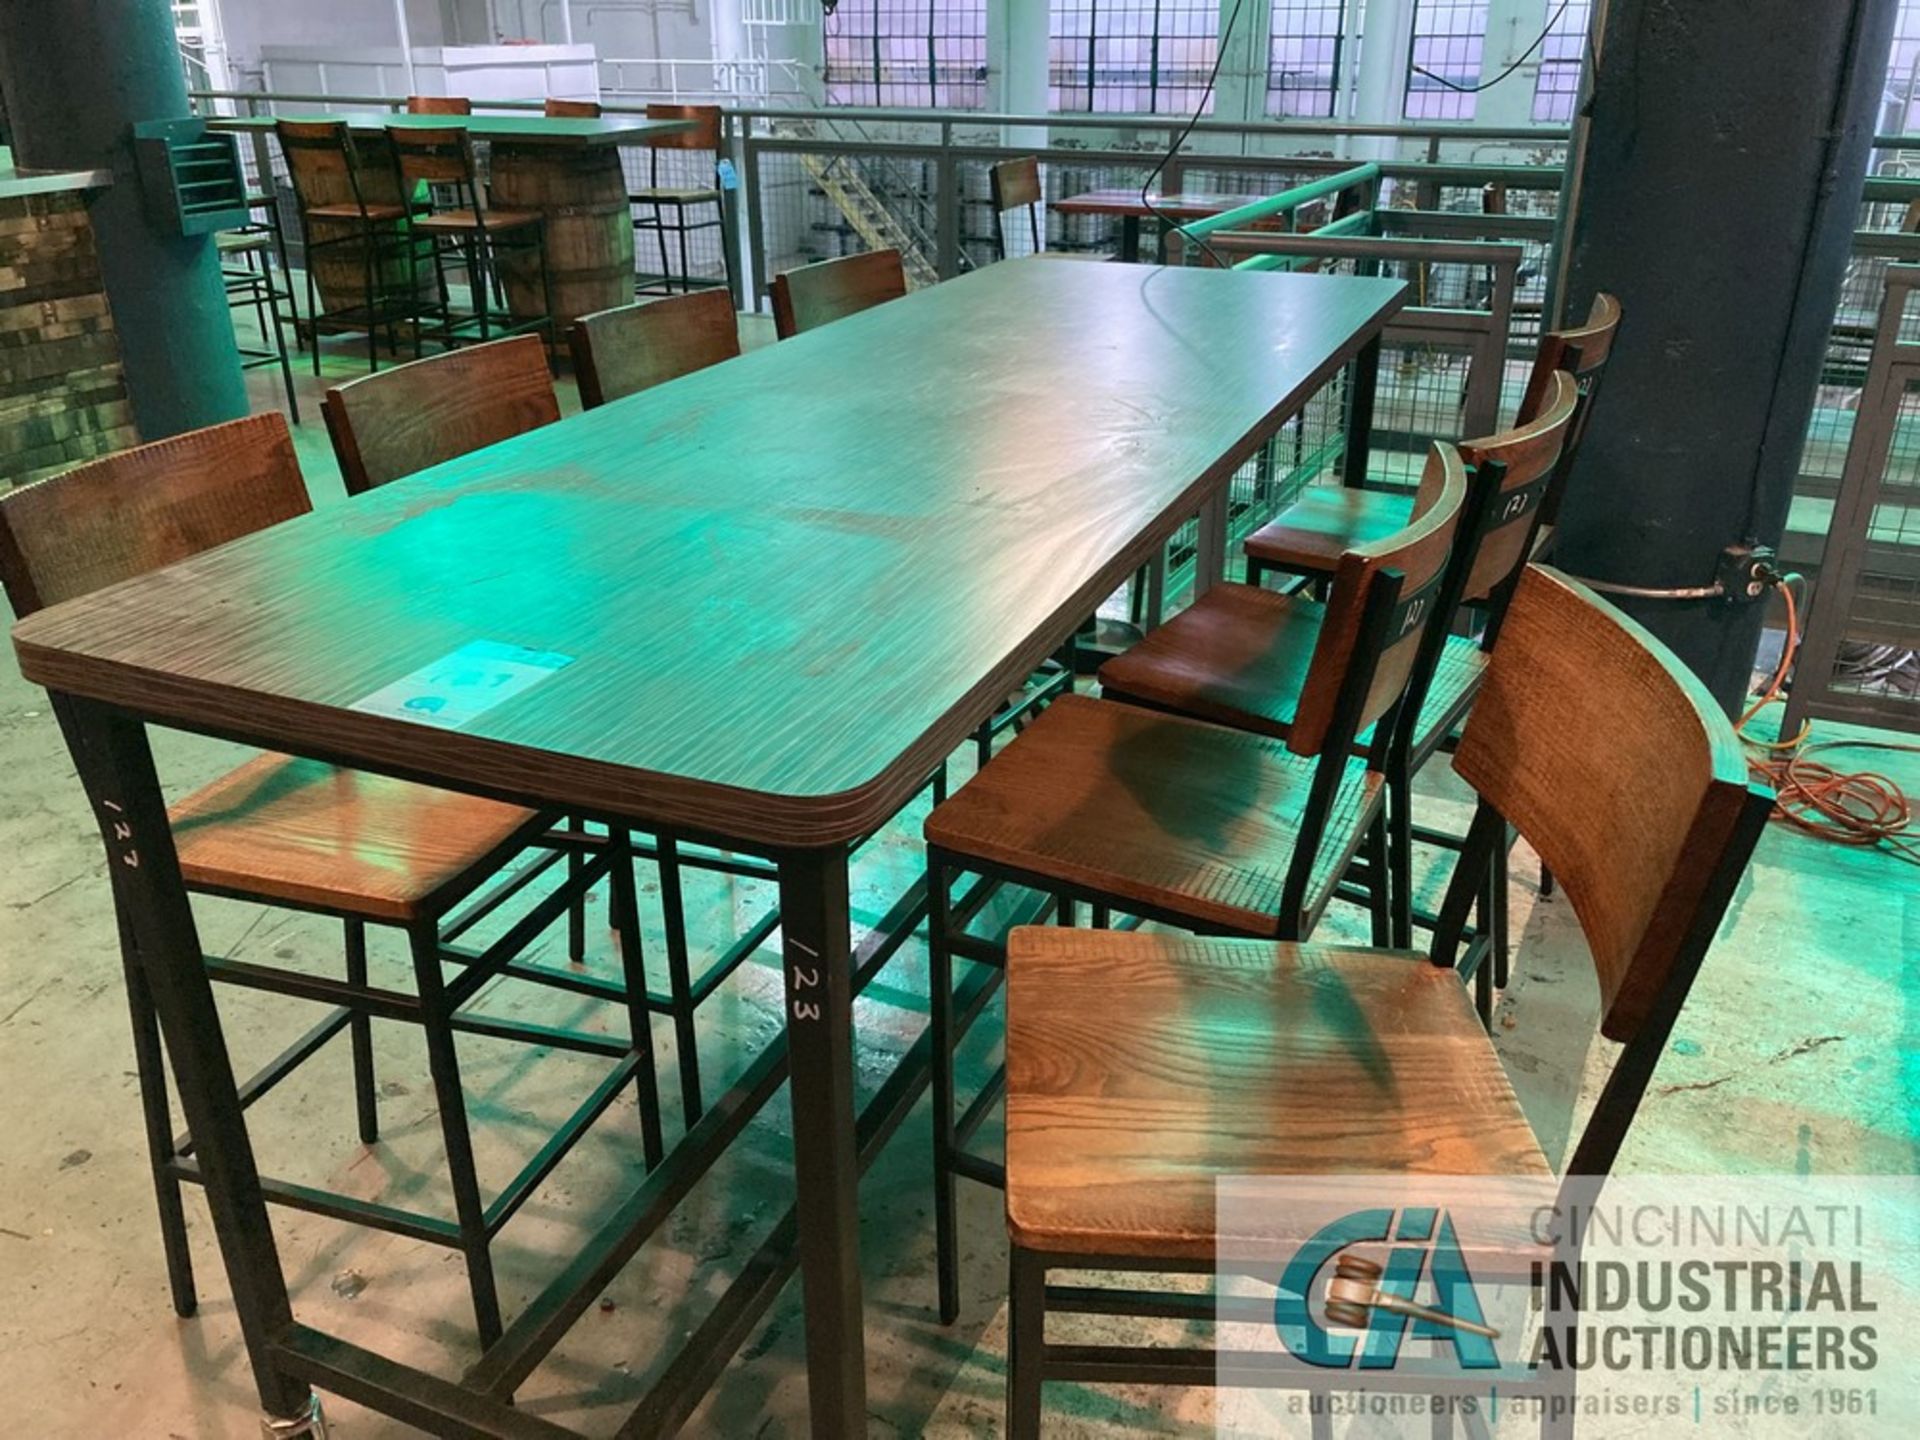 32" X 92" X 43" HIGH PORTABLE TABLE WITH (8) CHAIRS **For convenience, the loading fee of $100.00 - Image 3 of 4